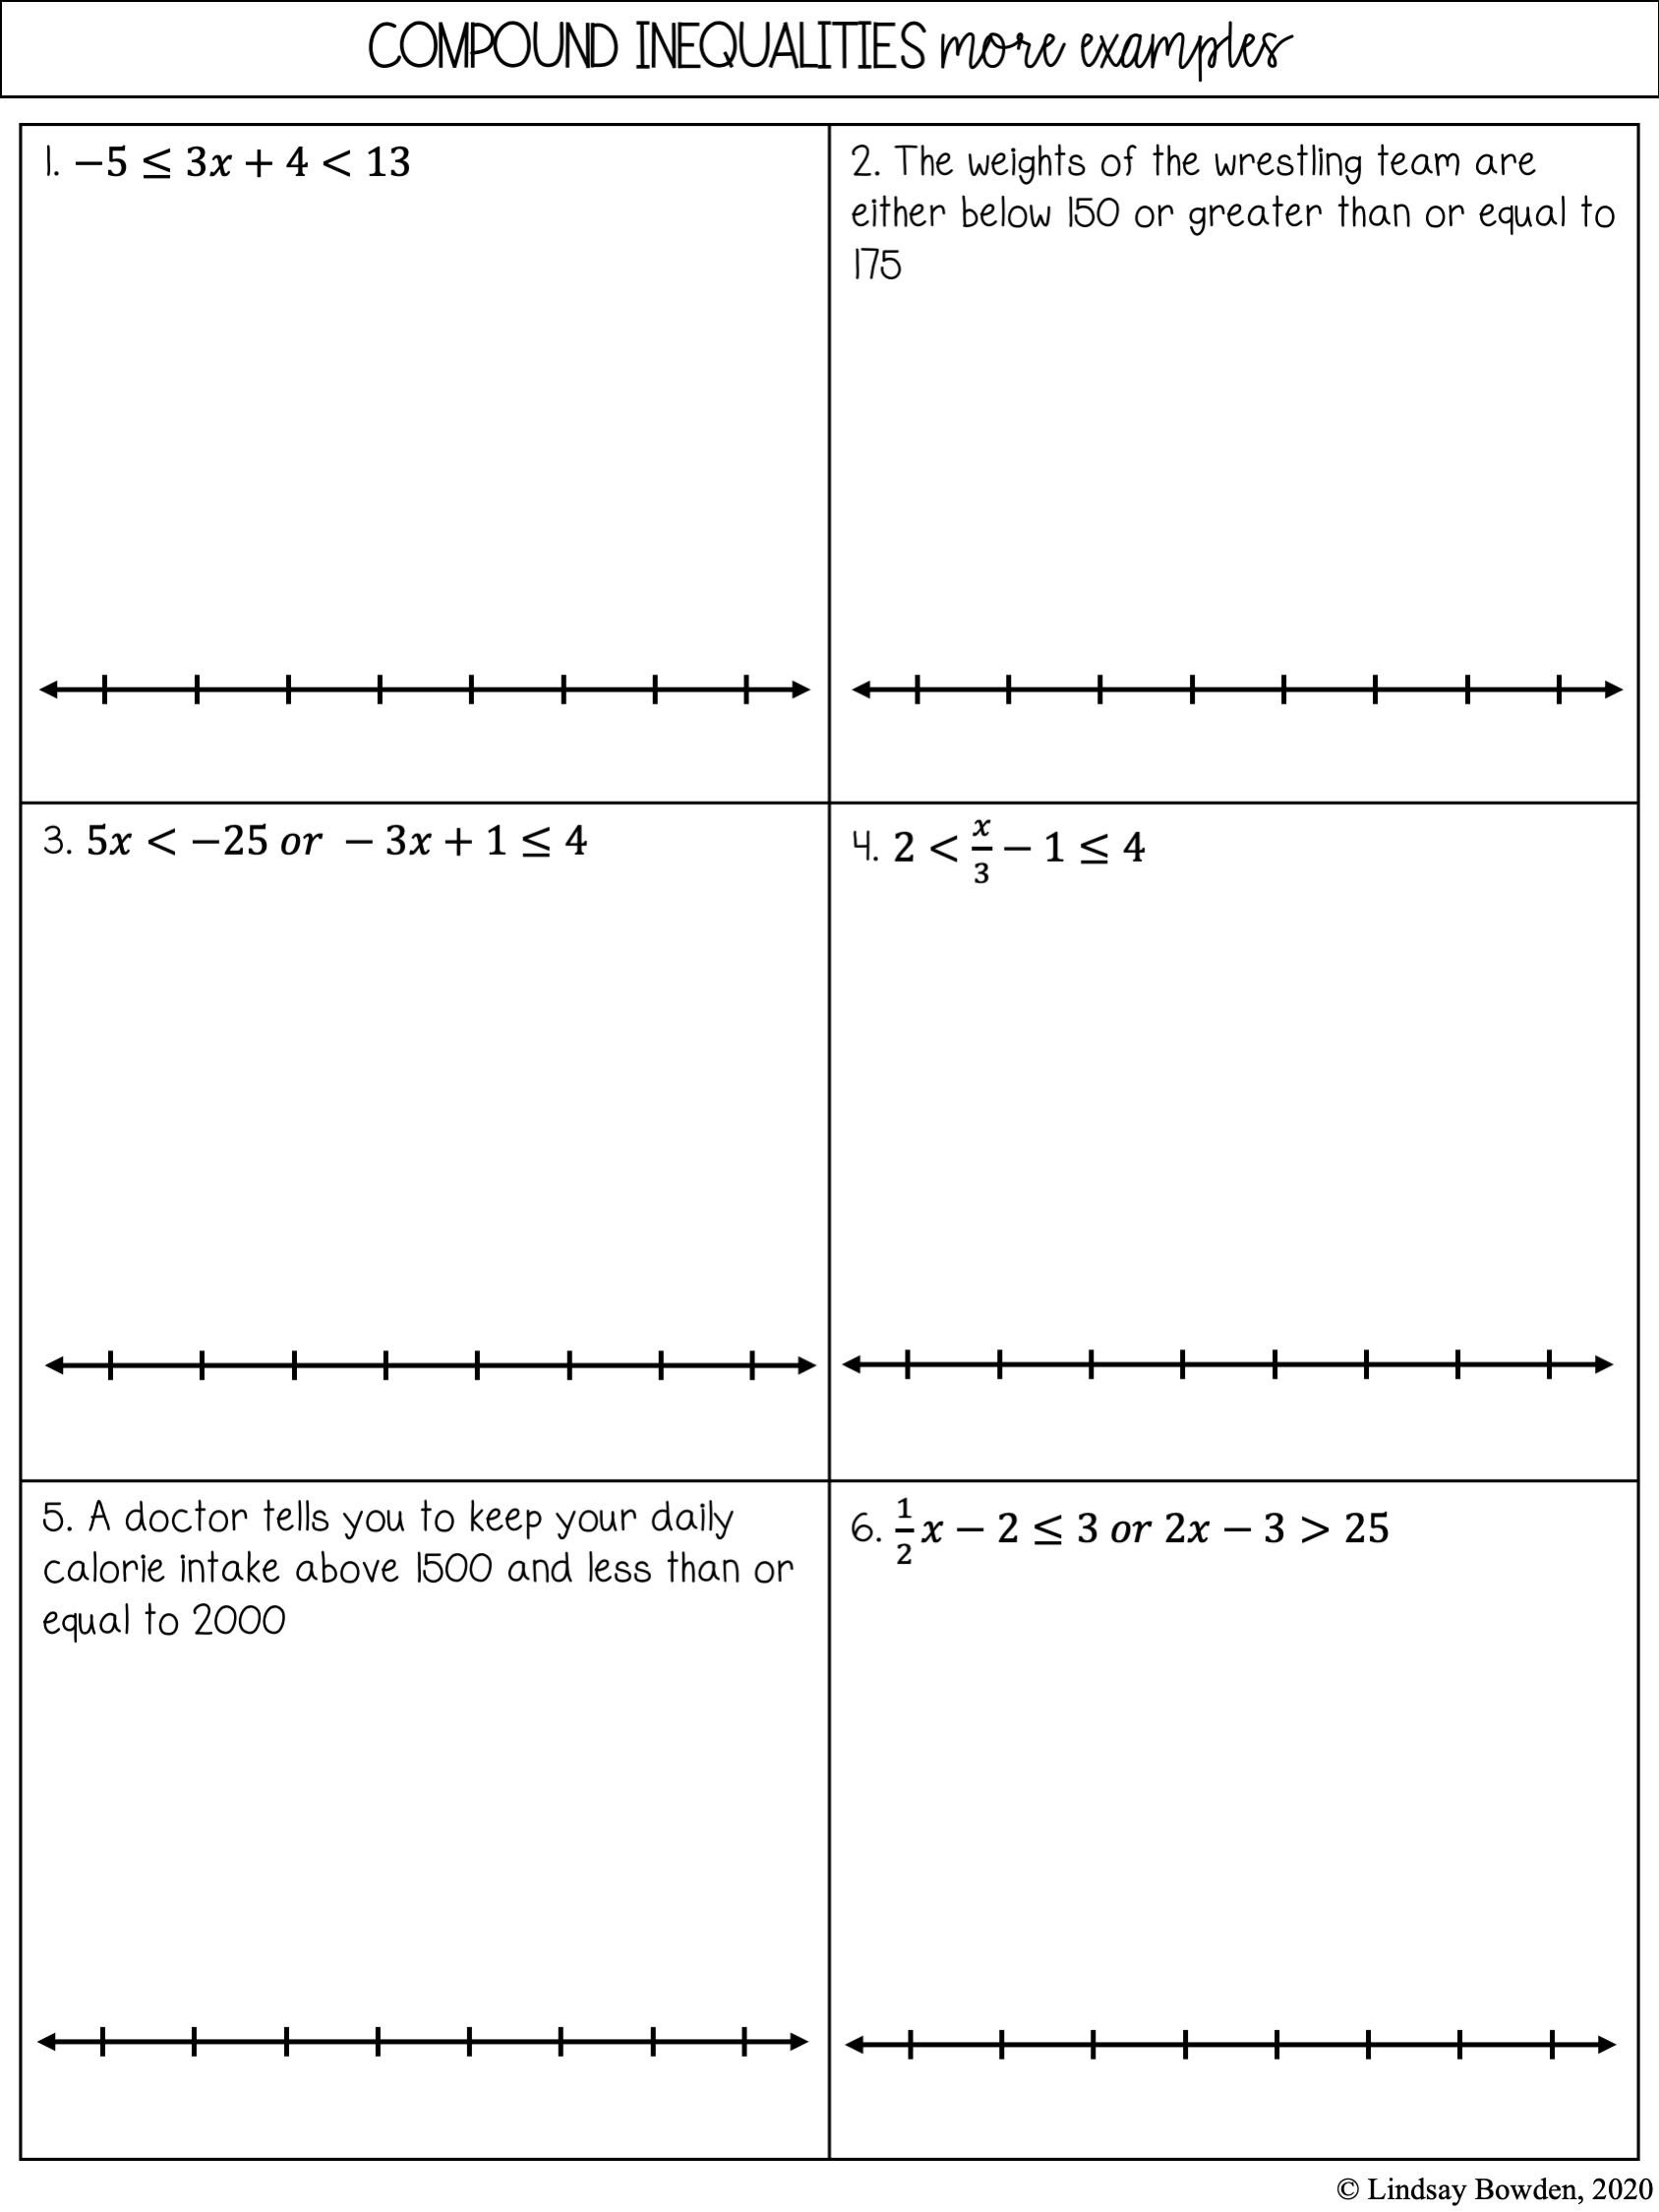 Compound Inequalities Notes and Worksheets - Lindsay Bowden Inside Solving Compound Inequalities Worksheet